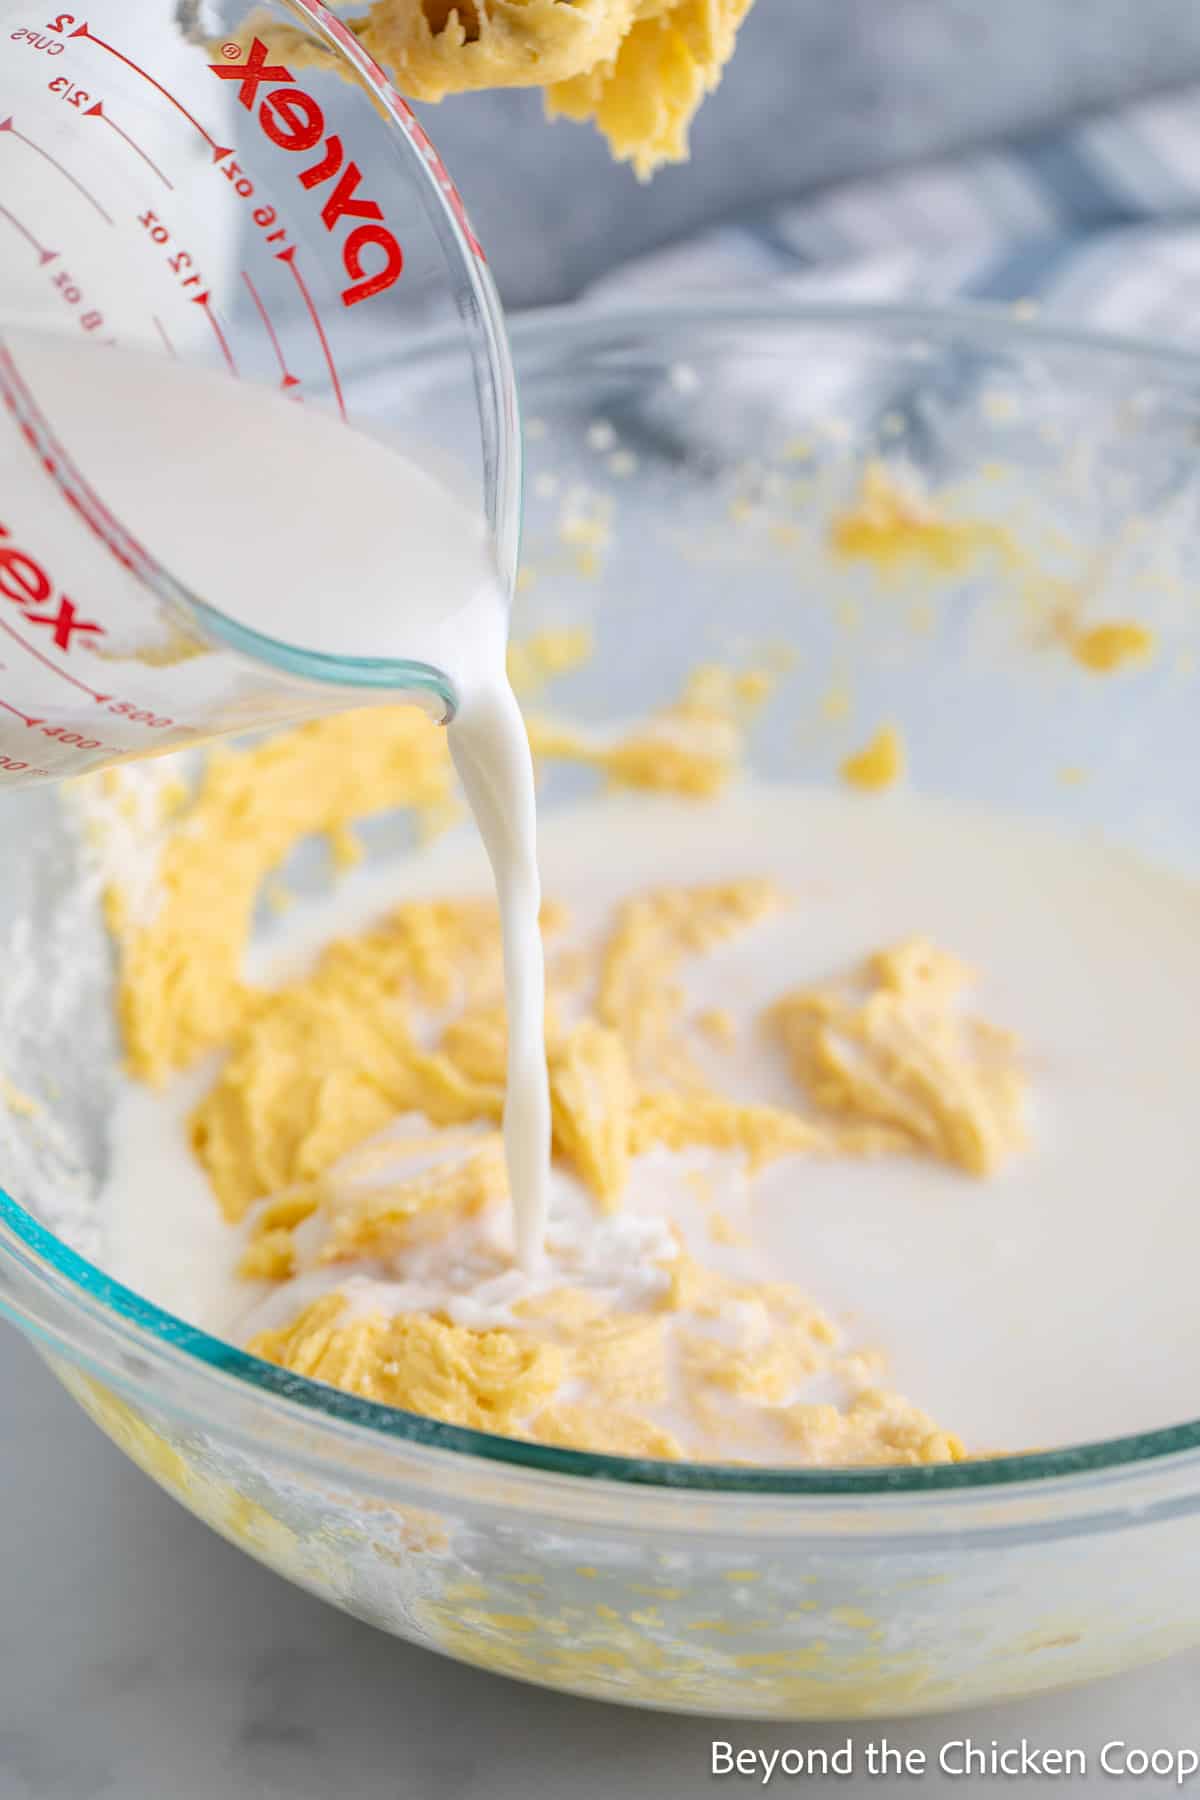 Pouring milk into cake batter. 